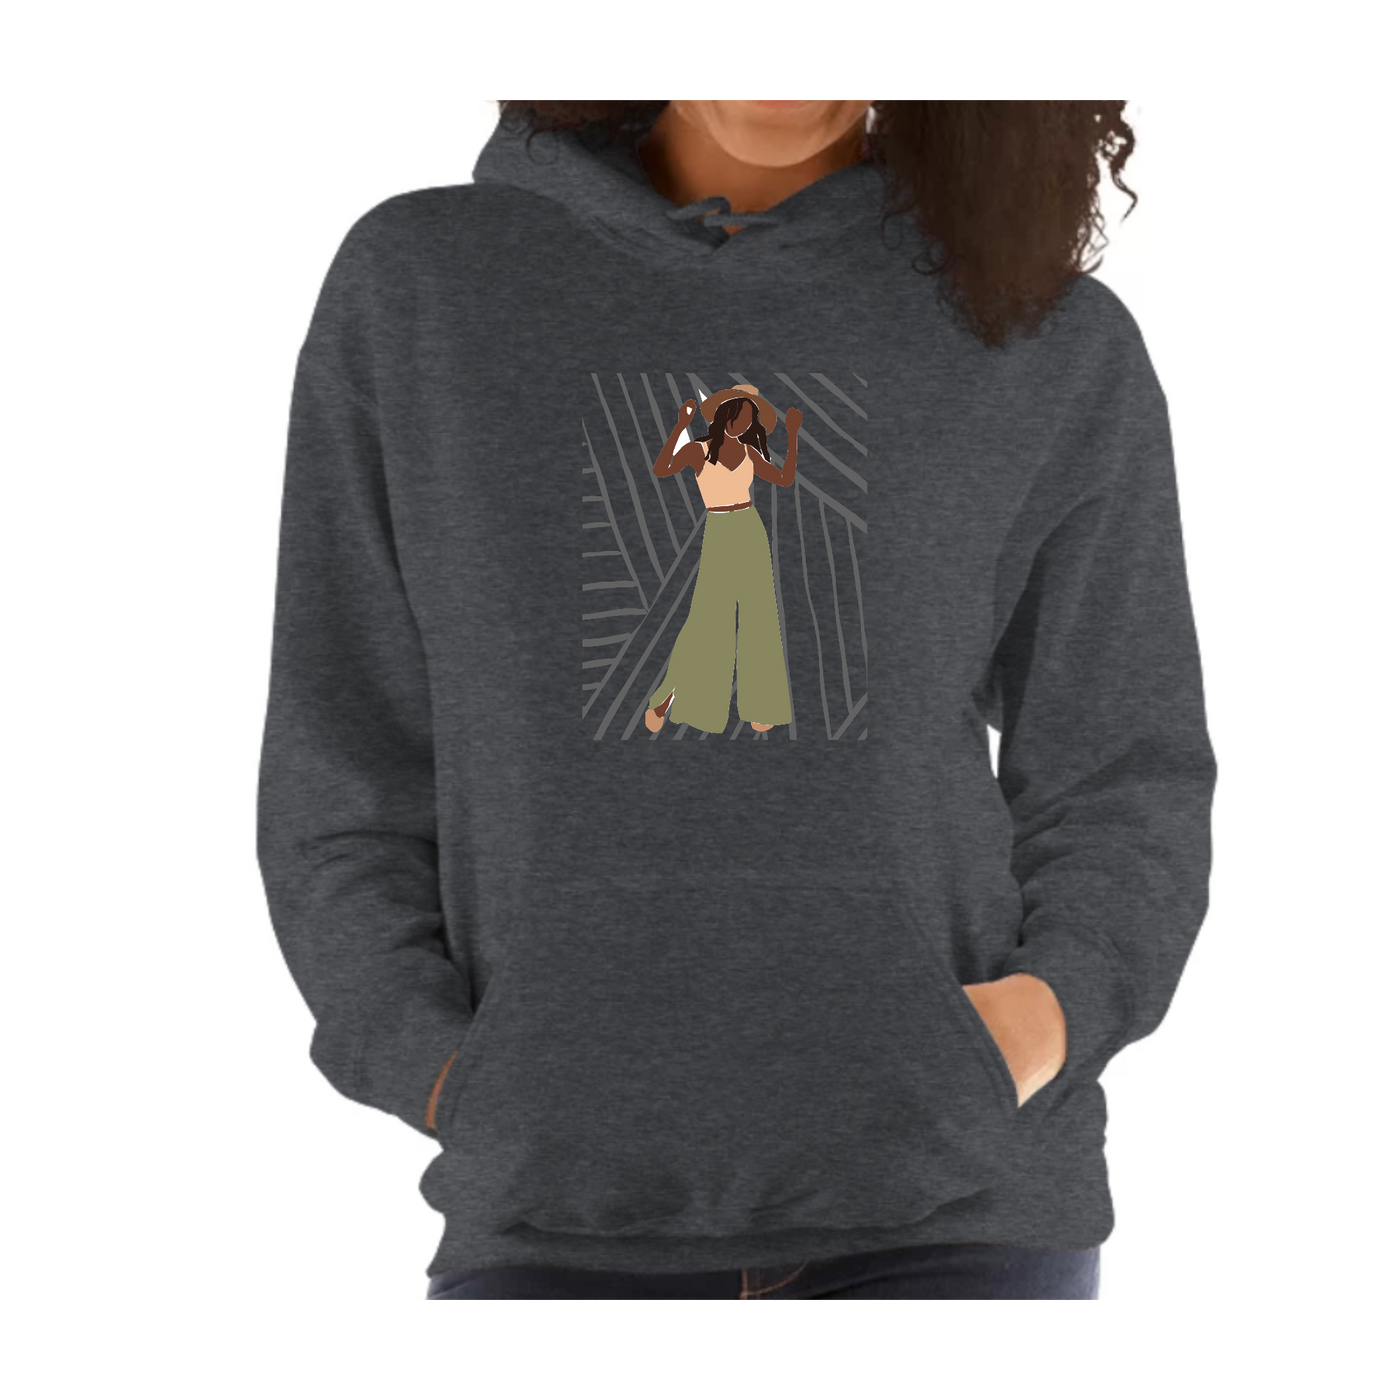 Womens Hoodie Say It Soul Its Her Groove Thing Positive Inspiration - Womens